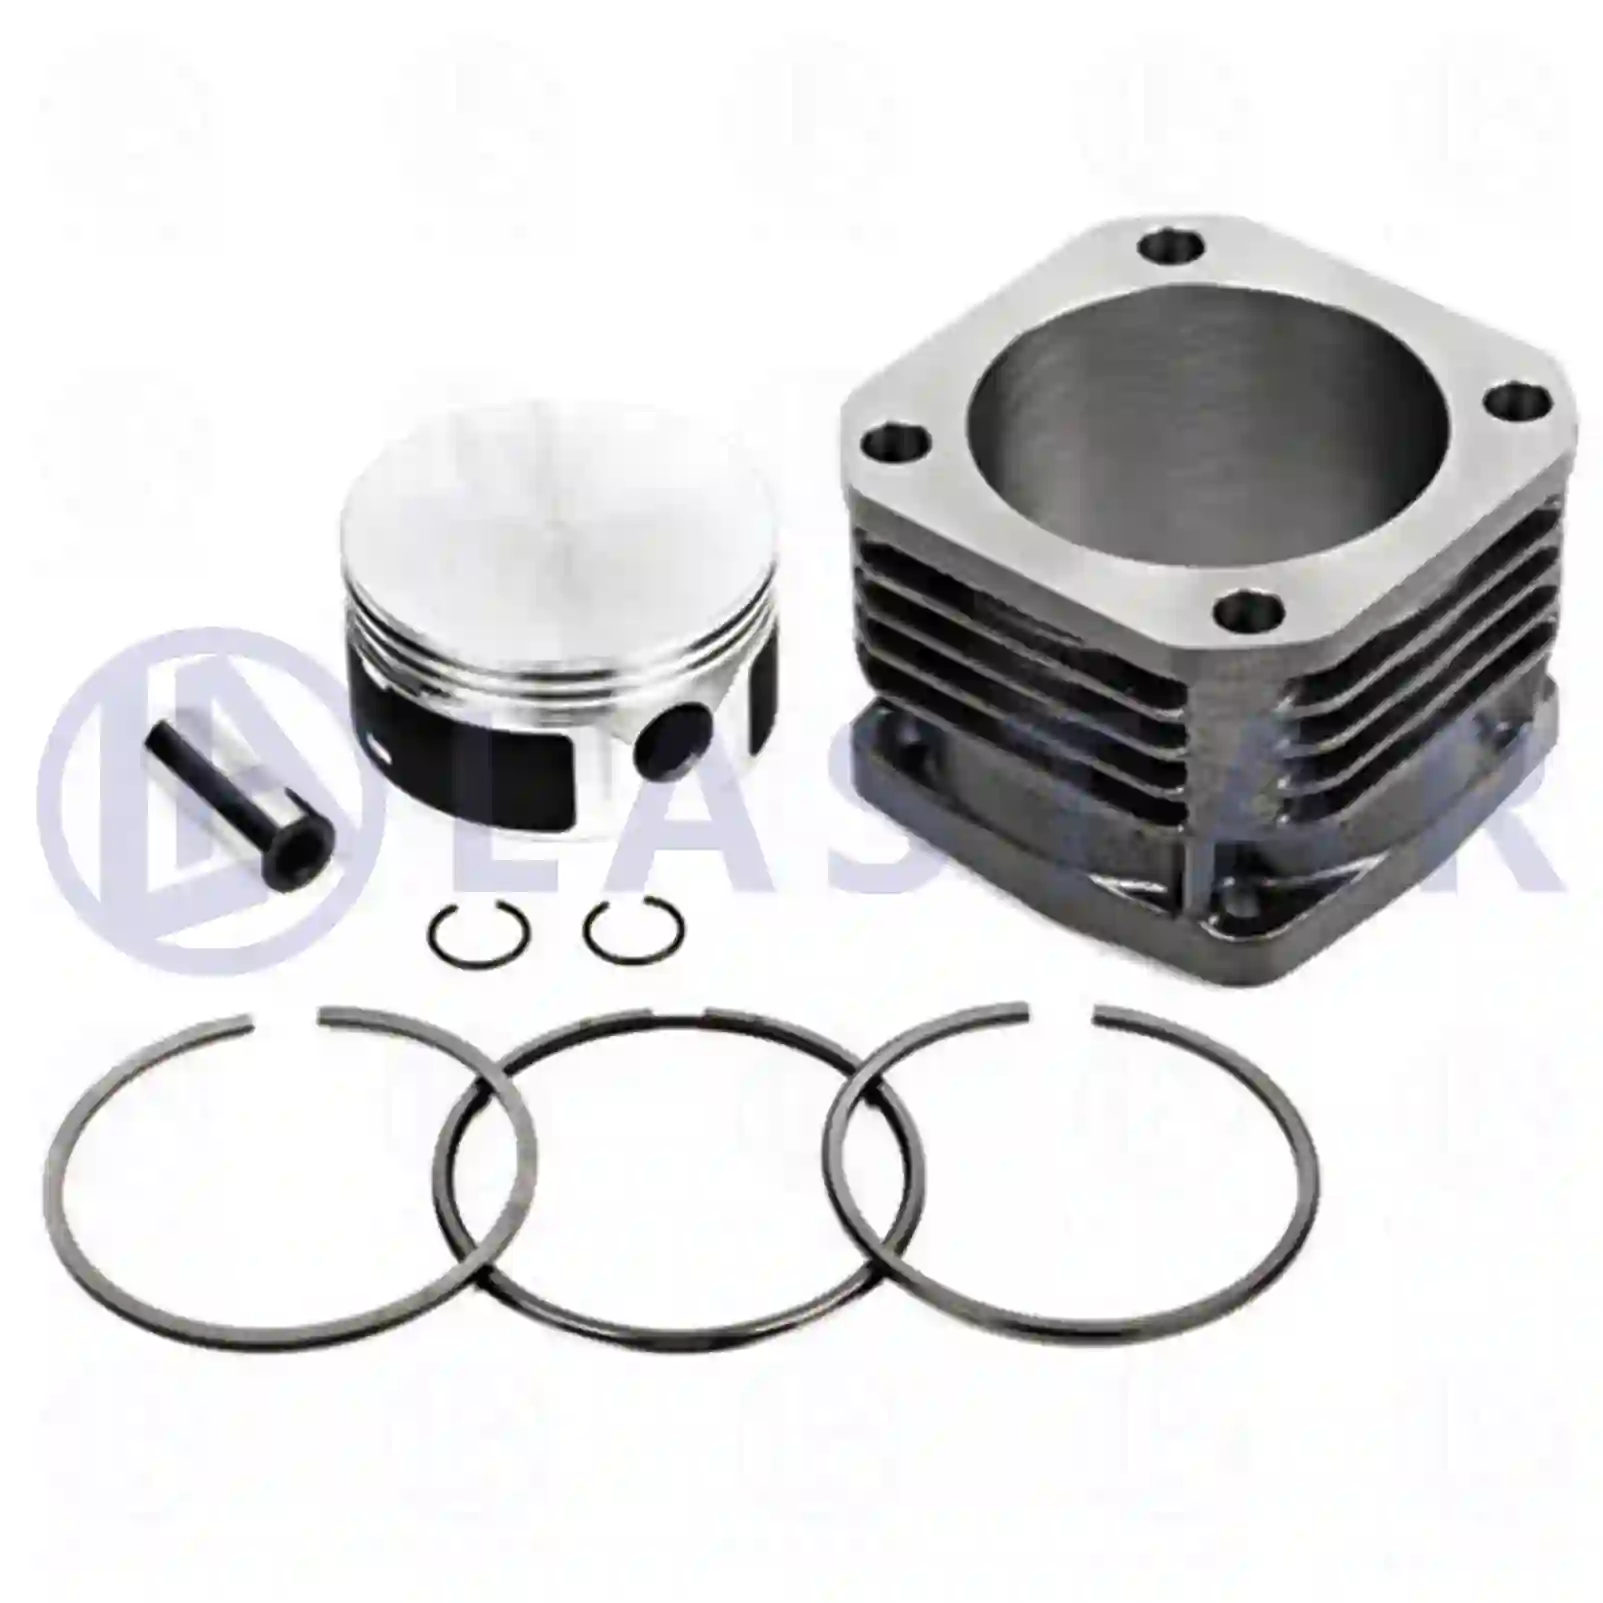 Piston and liner kit, compressor, 77714971, 5411300008, ZG50560-0008 ||  77714971 Lastar Spare Part | Truck Spare Parts, Auotomotive Spare Parts Piston and liner kit, compressor, 77714971, 5411300008, ZG50560-0008 ||  77714971 Lastar Spare Part | Truck Spare Parts, Auotomotive Spare Parts